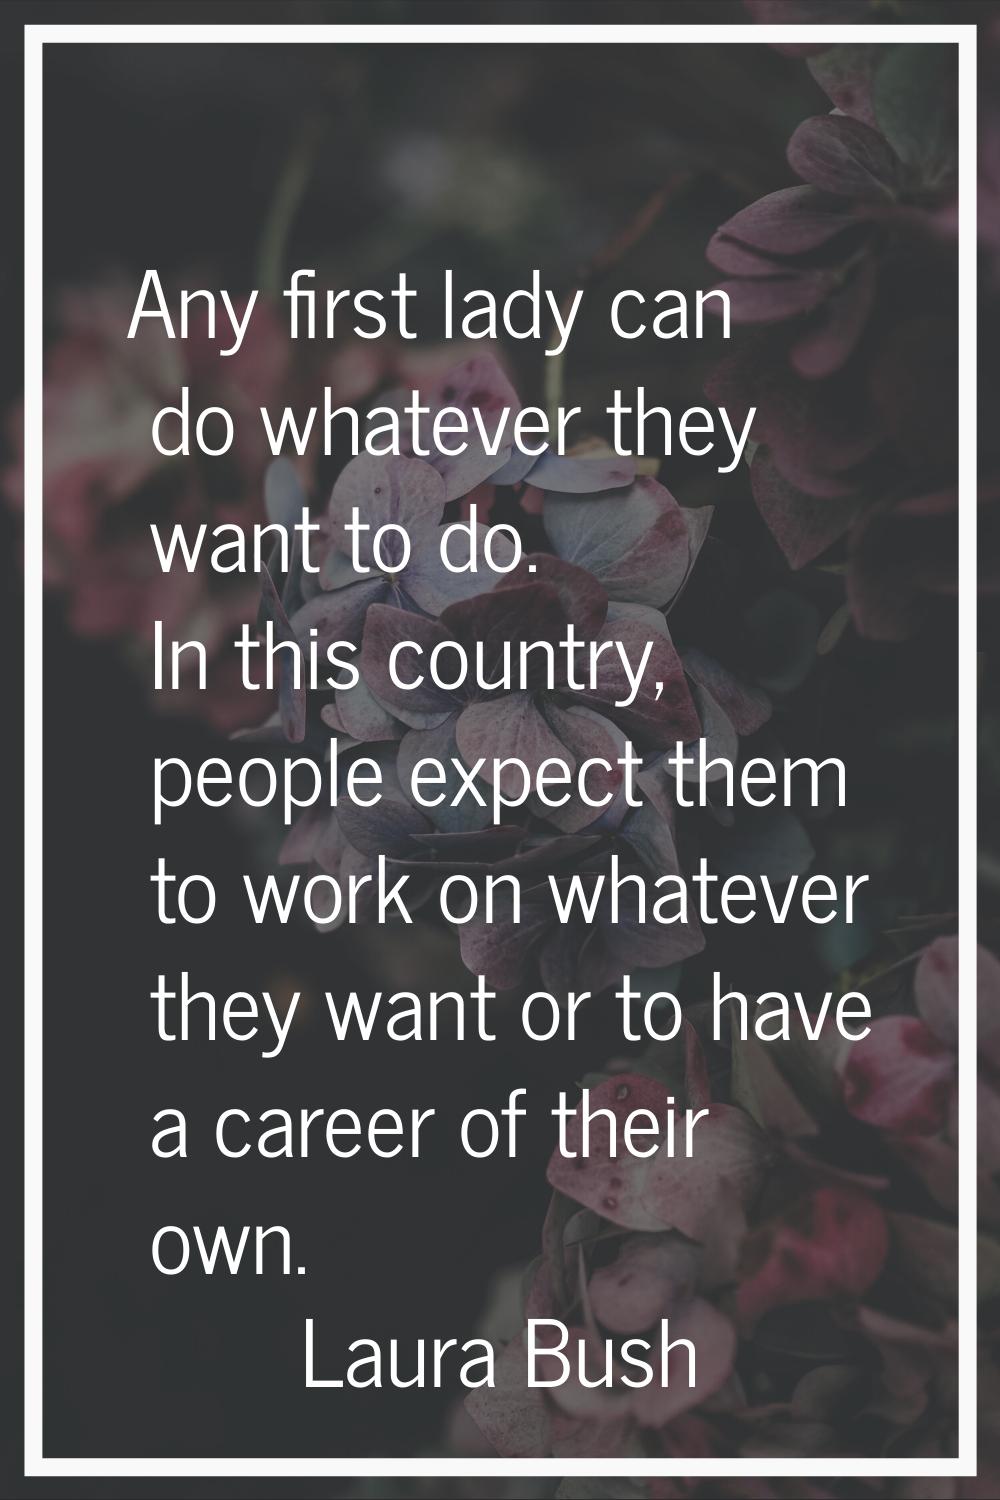 Any first lady can do whatever they want to do. In this country, people expect them to work on what